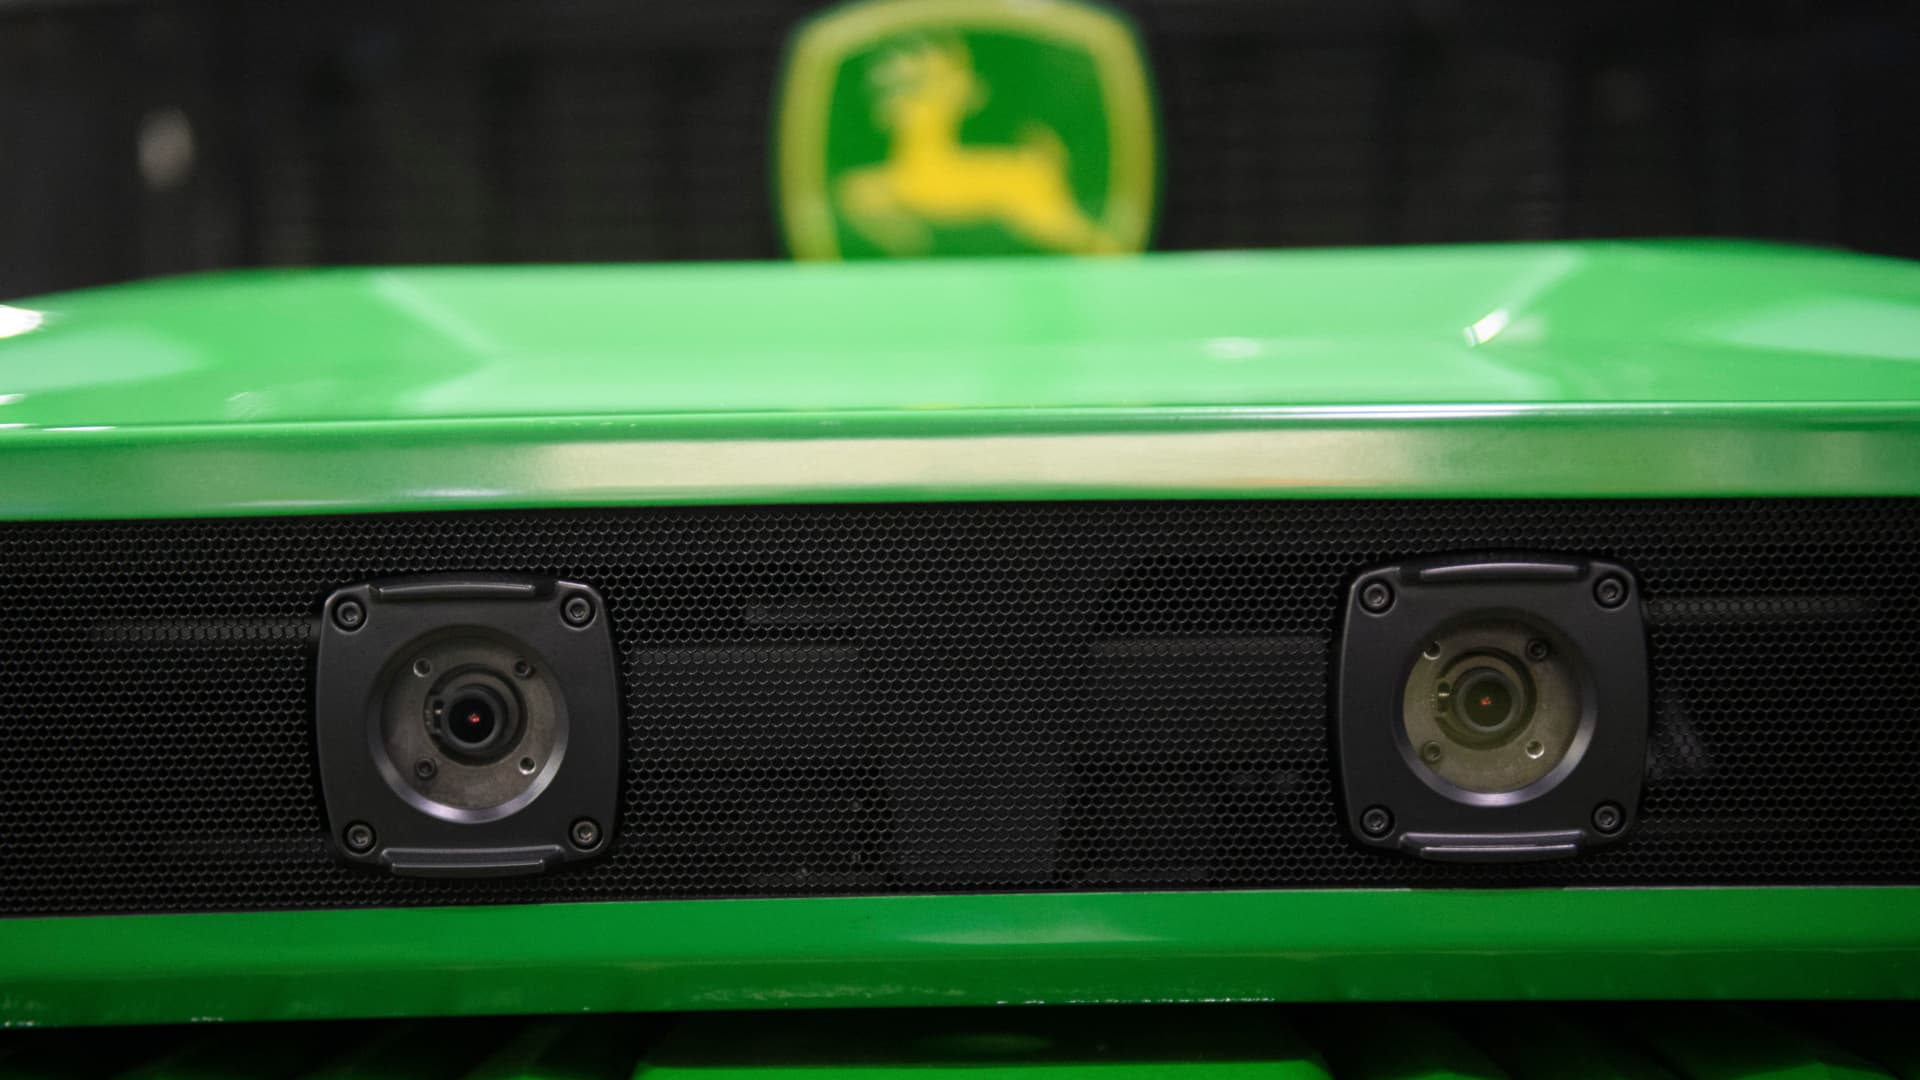 Front cameras on the Deer & Co. John Deere 8R fully autonomous tractor displayed ahead of the Consumer Electronics Show (CES) on January 4, 2022 in Las Vegas, Nevada.